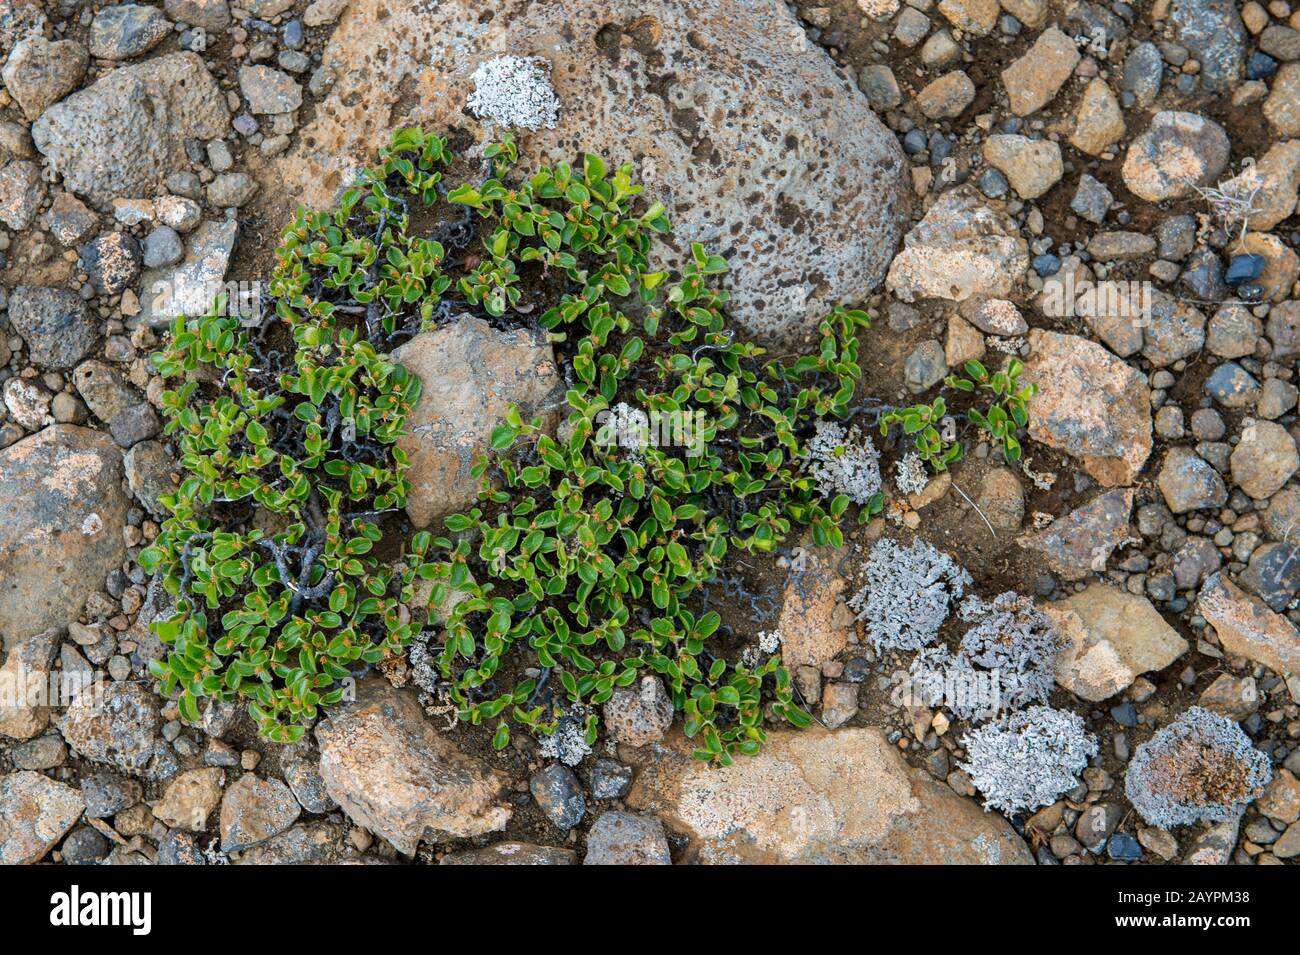 A Bilberry (Vaccinium myrtillus) is growing between the rocks in the barren landscape of the northwestern highlands in Iceland. Stock Photo